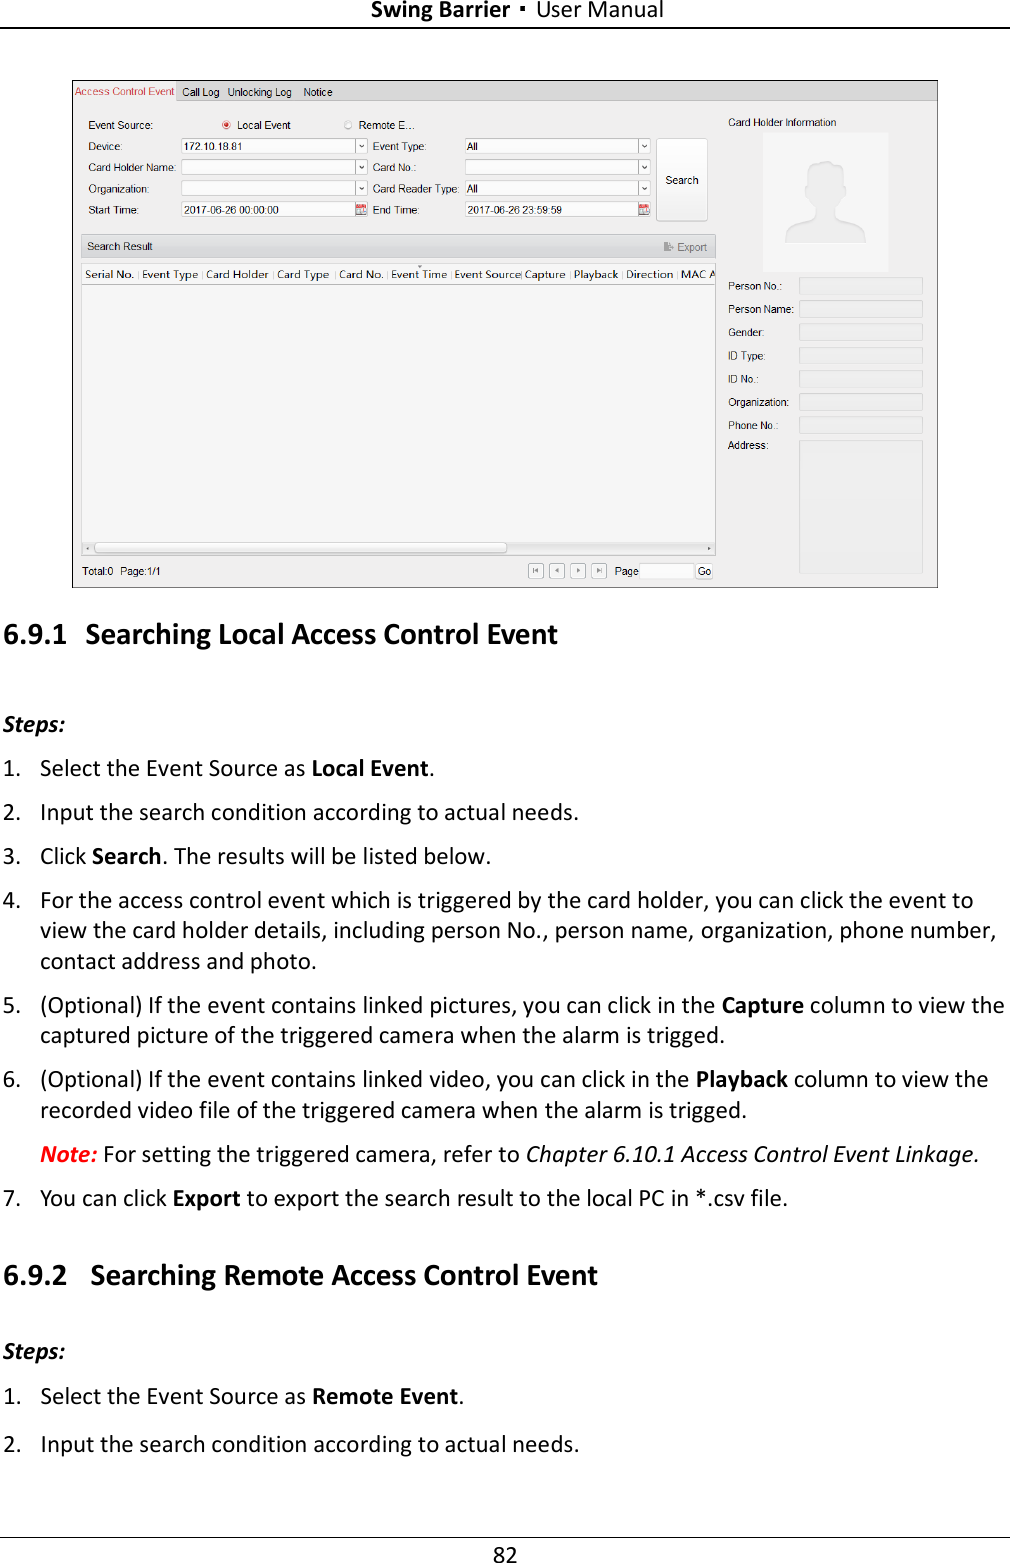 Swing Barrier·User Manual 82  6.9.1 Searching Local Access Control Event Steps: 1. Select the Event Source as Local Event. 2. Input the search condition according to actual needs. 3. Click Search. The results will be listed below. 4. For the access control event which is triggered by the card holder, you can click the event to view the card holder details, including person No., person name, organization, phone number, contact address and photo. 5. (Optional) If the event contains linked pictures, you can click in the Capture column to view the captured picture of the triggered camera when the alarm is trigged. 6. (Optional) If the event contains linked video, you can click in the Playback column to view the recorded video file of the triggered camera when the alarm is trigged. Note: For setting the triggered camera, refer to Chapter 6.10.1 Access Control Event Linkage. 7. You can click Export to export the search result to the local PC in *.csv file. 6.9.2 Searching Remote Access Control Event Steps: 1. Select the Event Source as Remote Event. 2. Input the search condition according to actual needs. 